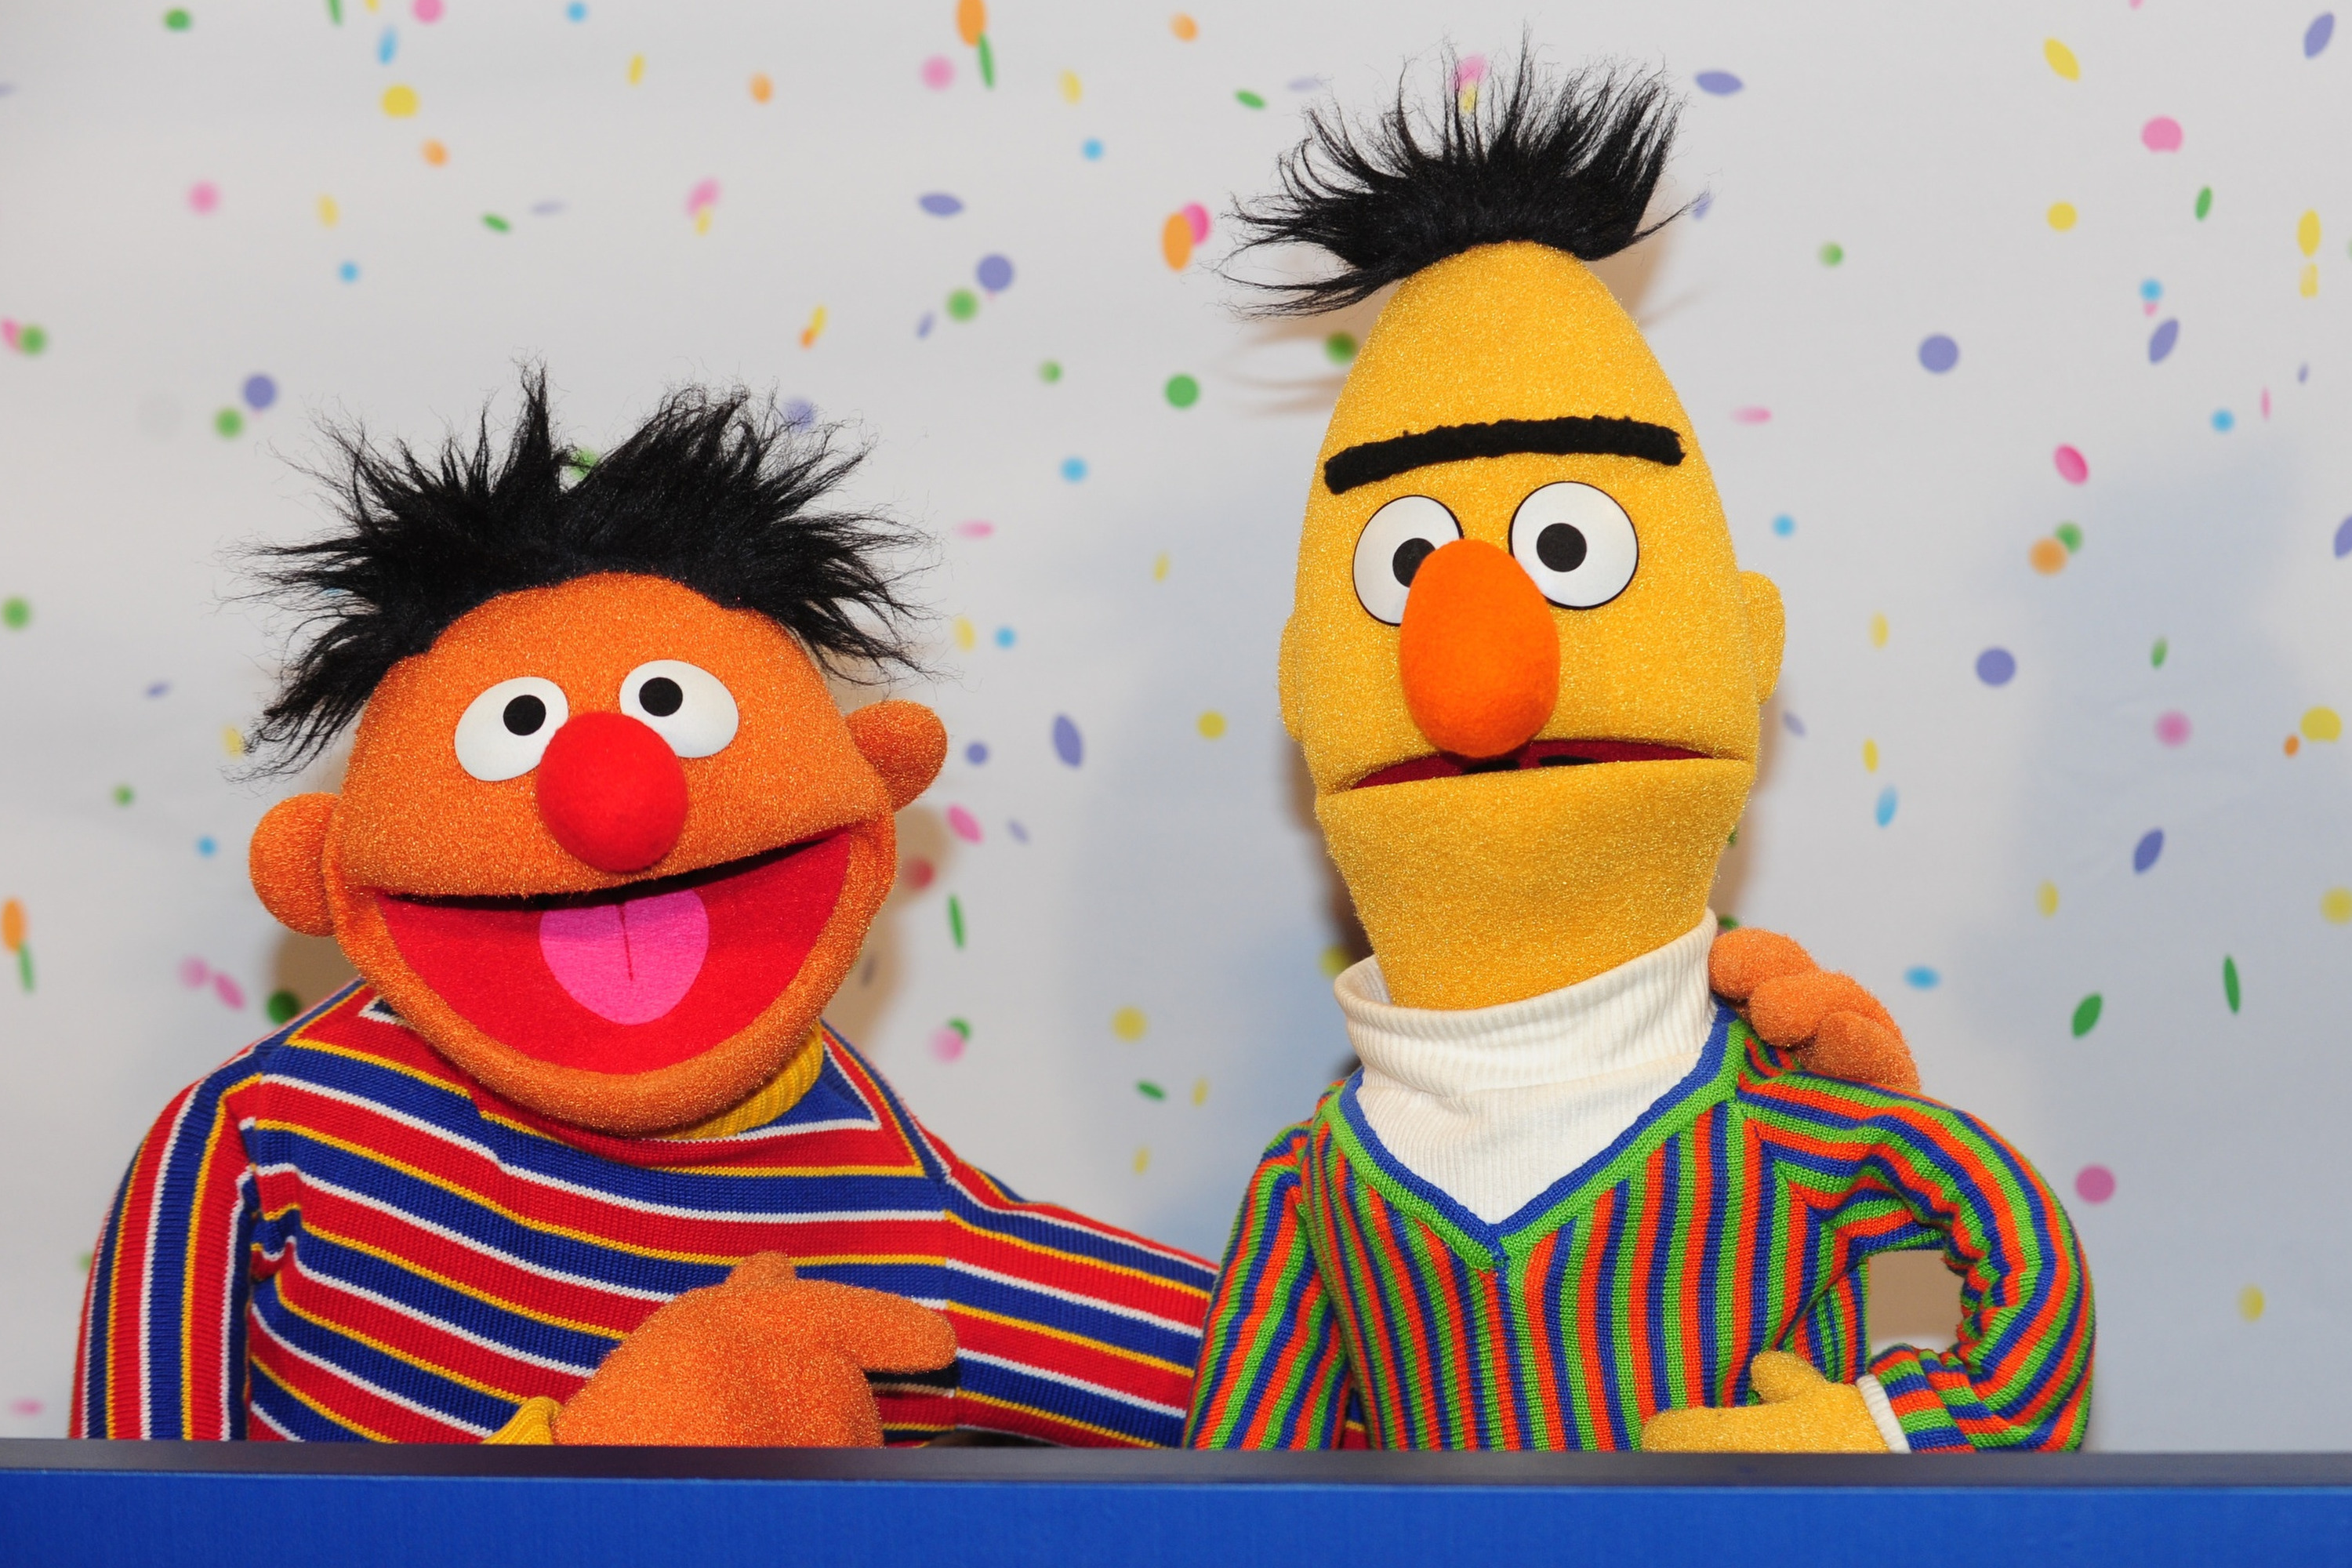 Sesame Street Muppets Ernie and Bert pose for photographs during a press conference on the 40th anniversary of the Sesame Street in Hamburg, Germany, 07 January 2013. (picture alliance&mdash;picture alliance via Getty Images)